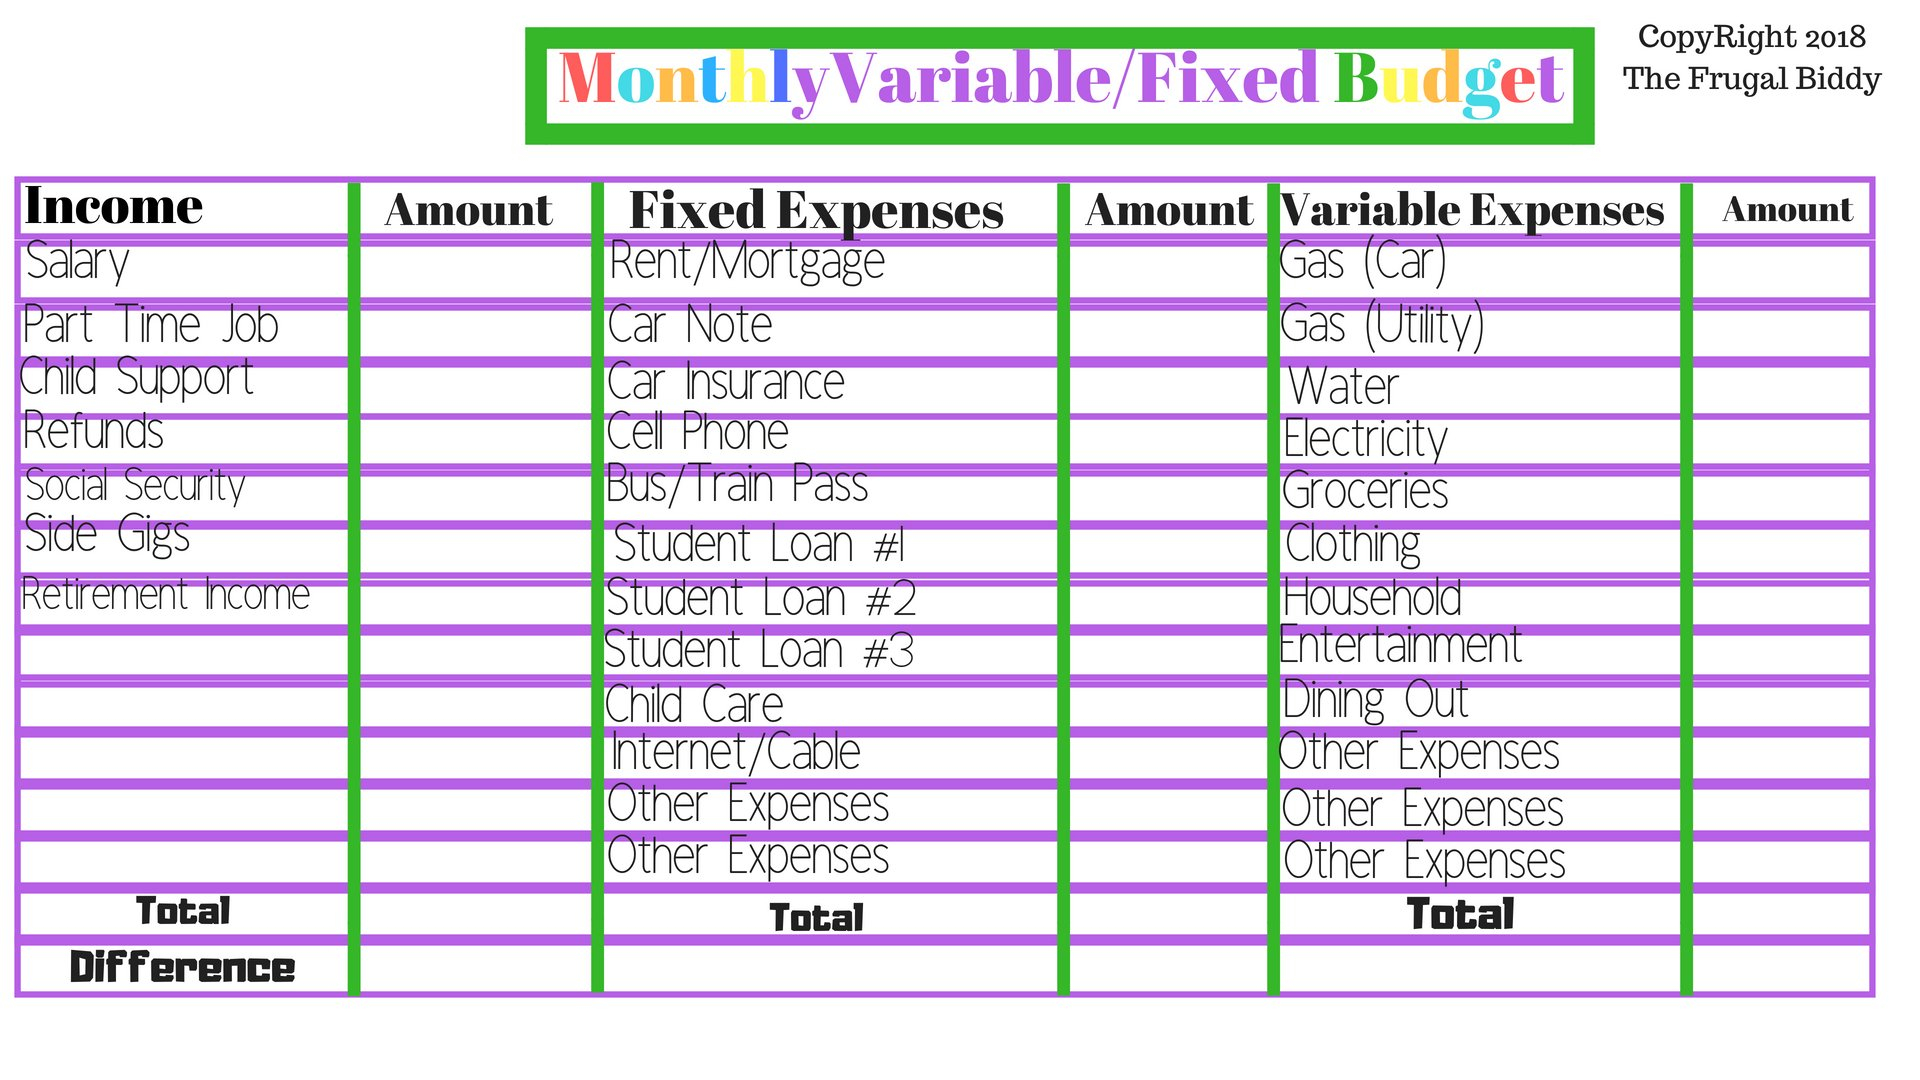 Budgeting Worksheets  The Frugal Biddy In Budgeting Worksheets For Students